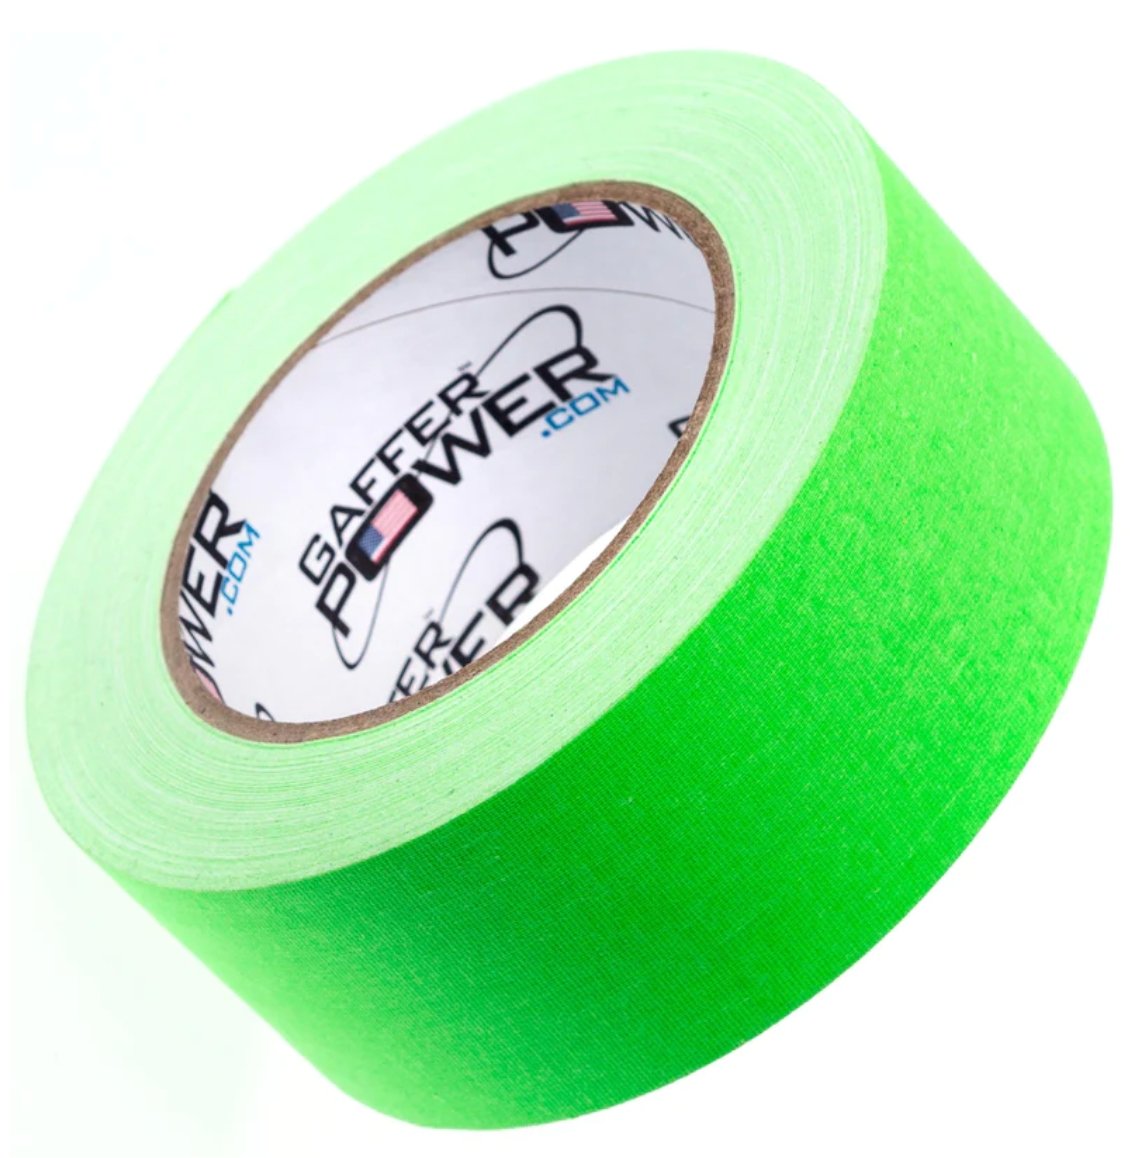 Pro Gaff® gaffers tape, Pro Tapes & Specialties®